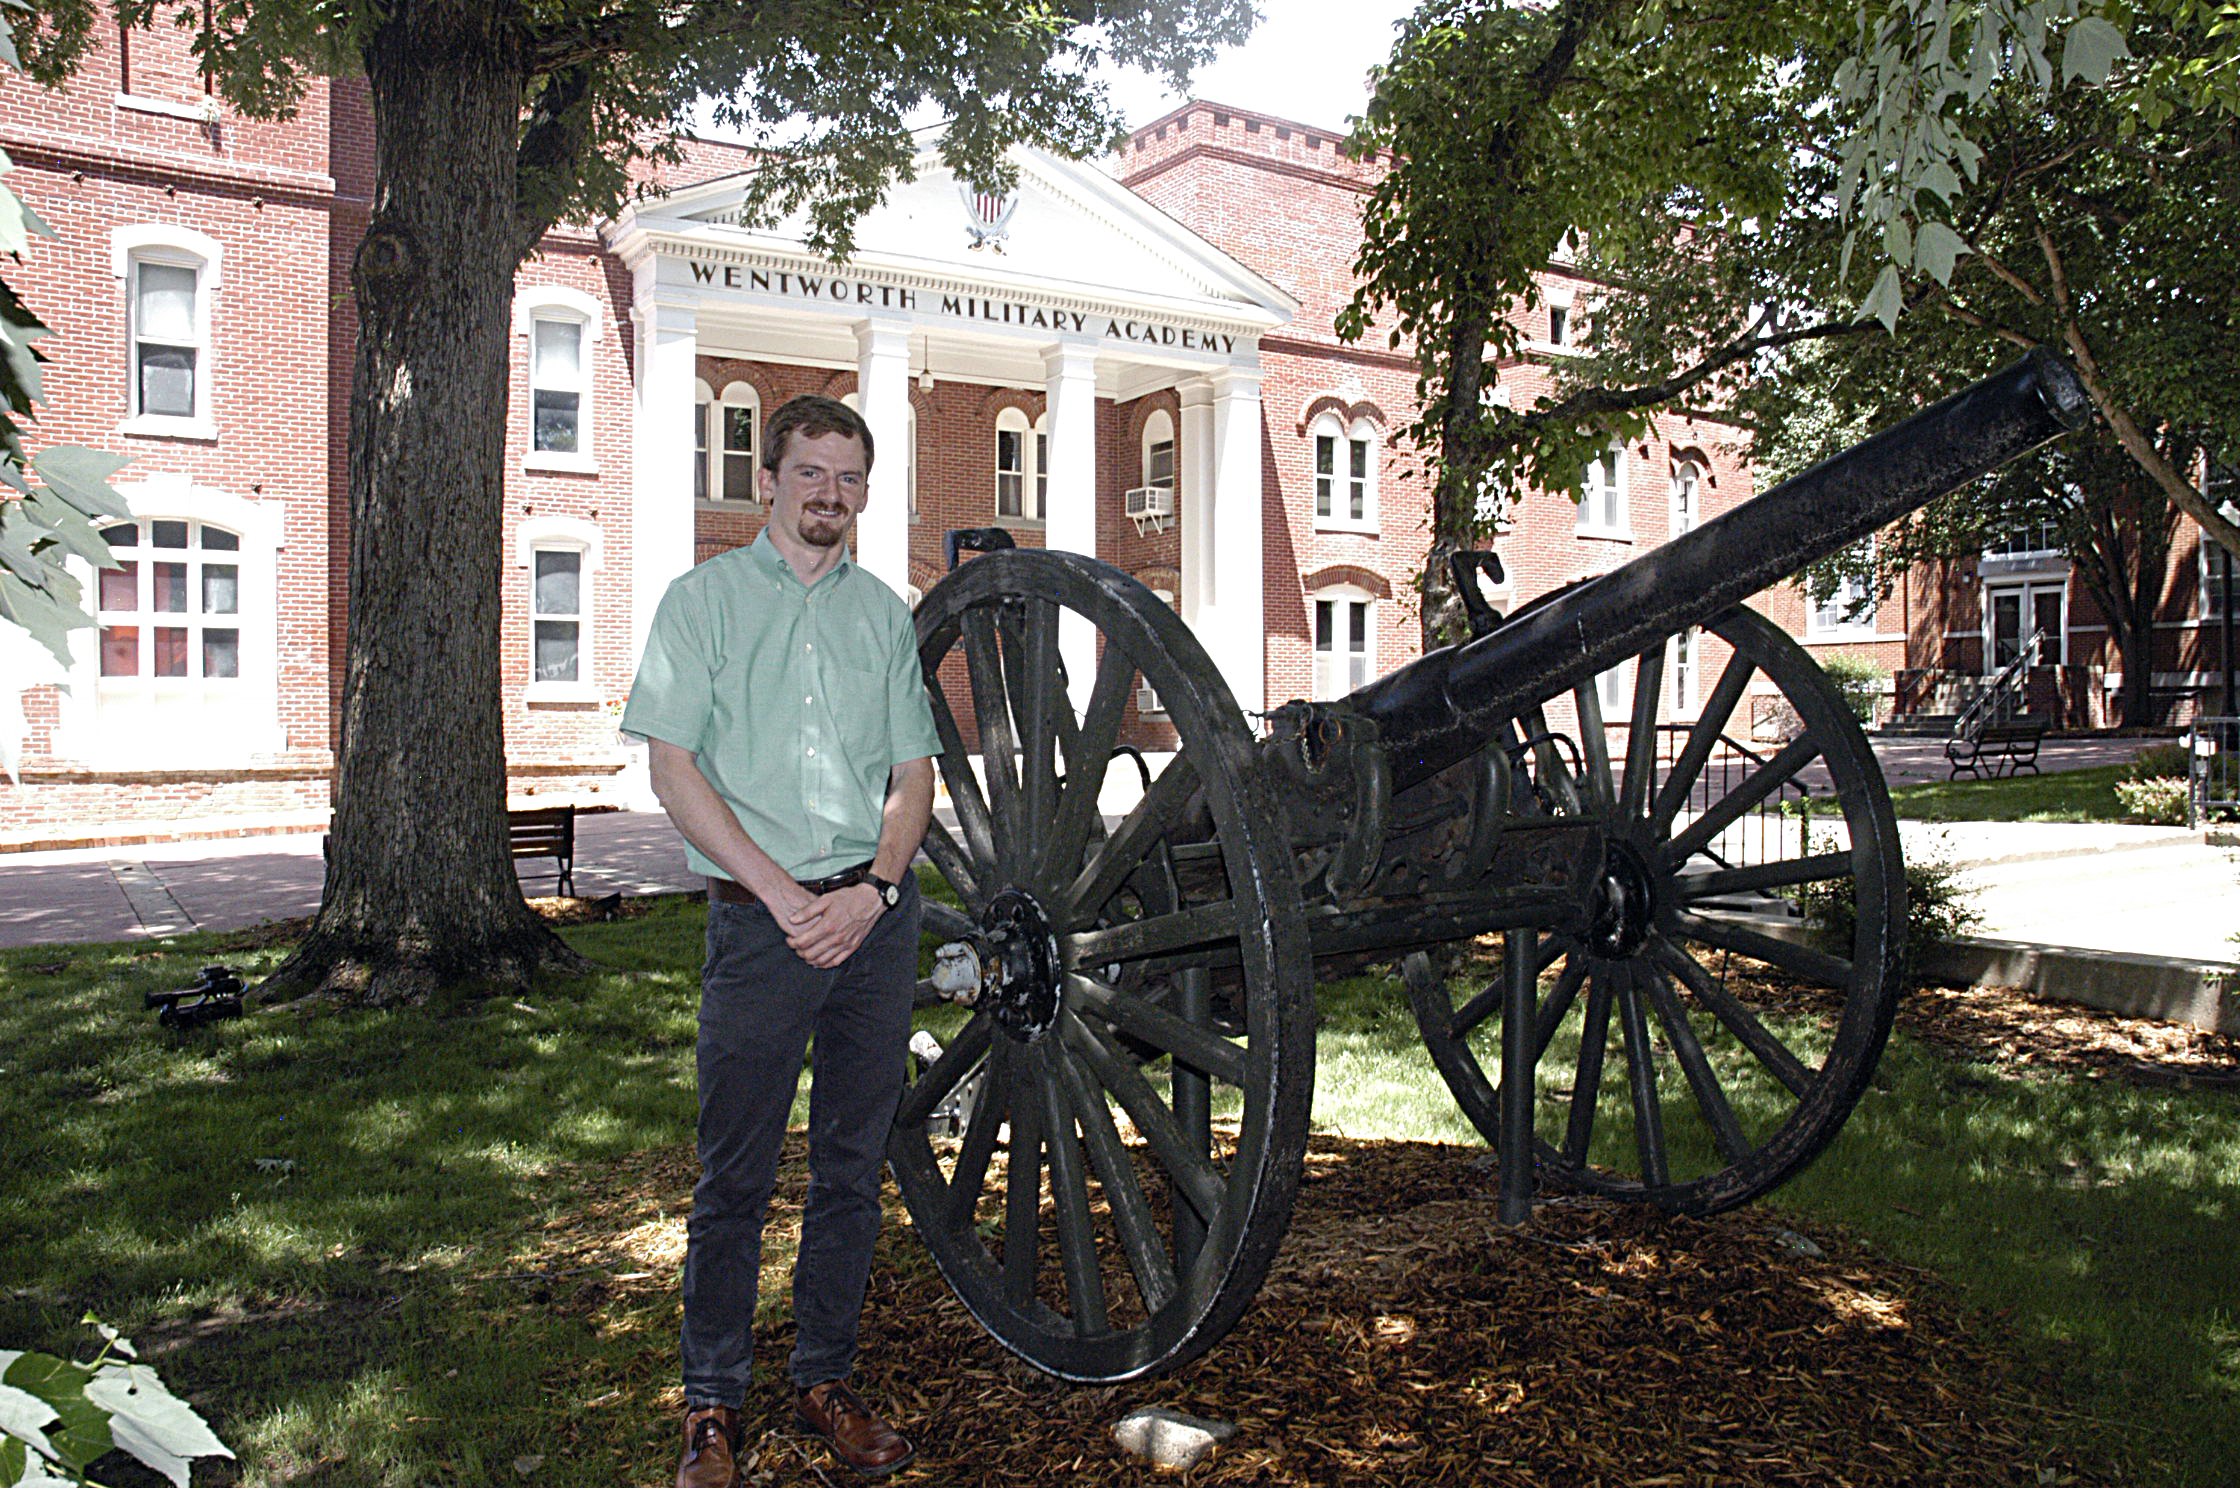 Mark Porth, MU Extension regional community arts specialist, in front of Lexington’s Wentworth Military Academy, which is listed on the National Register of Historic Places.